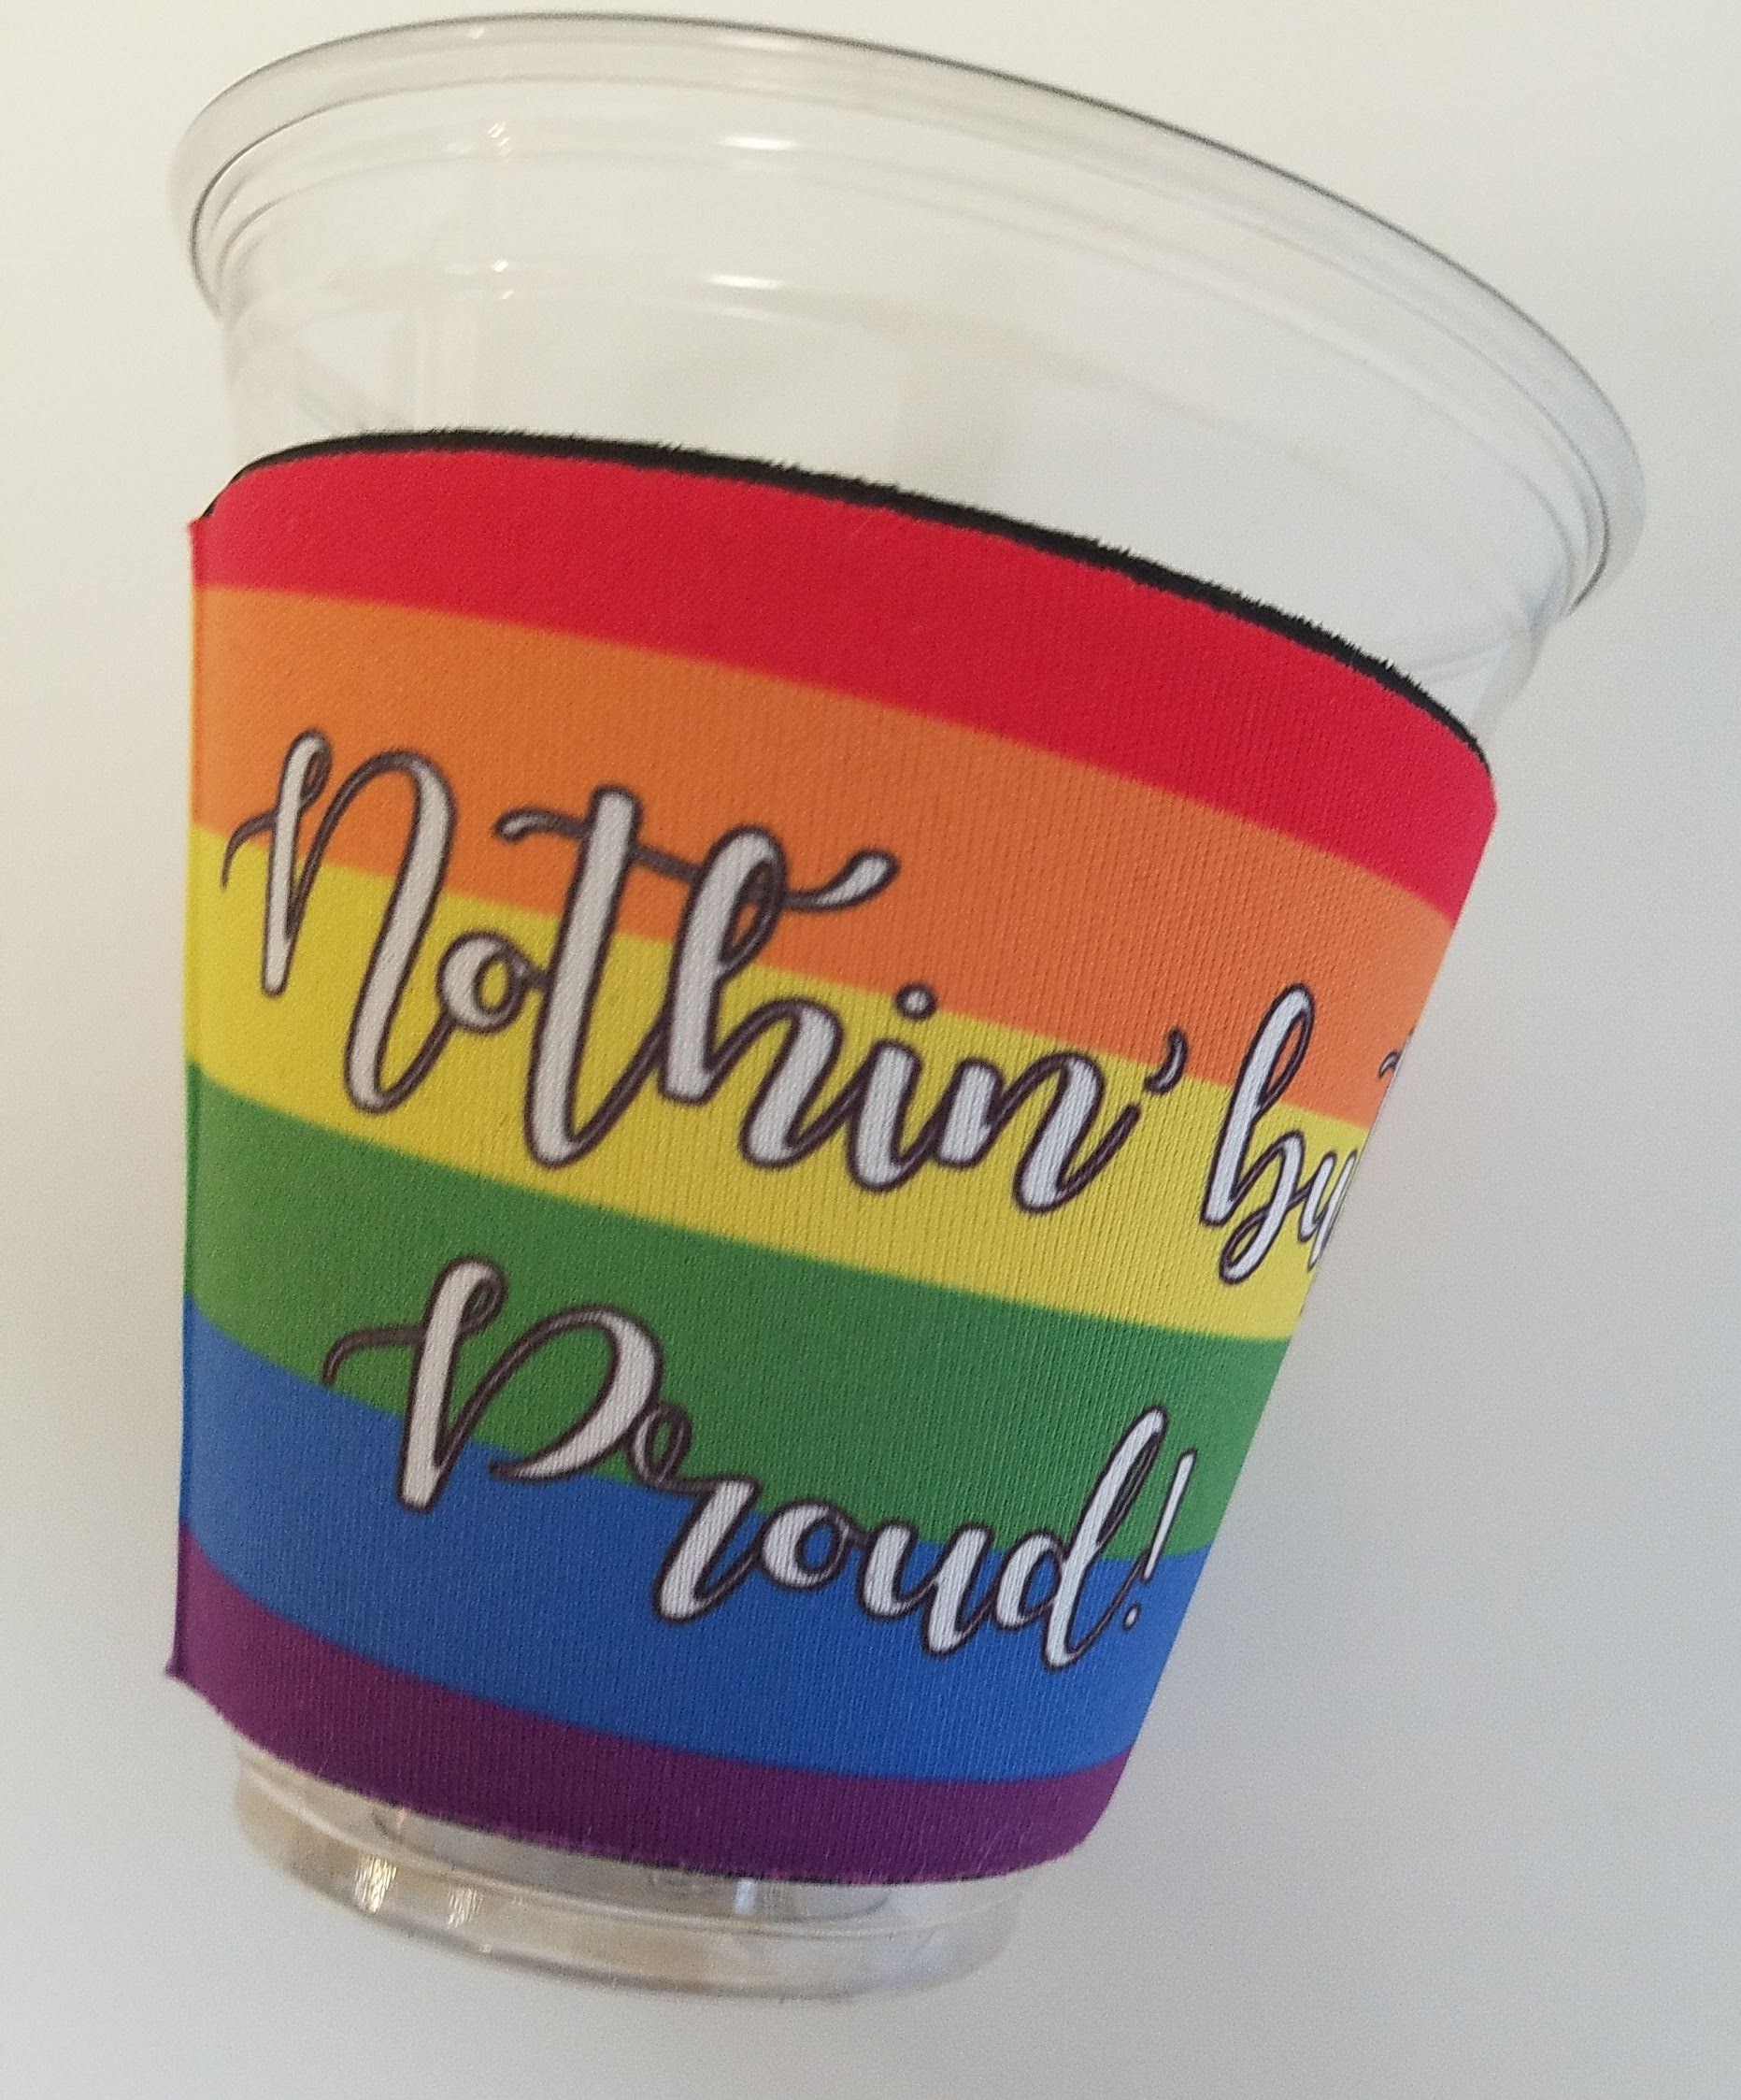 https://studiopattyd.com/wp-content/uploads/2022/05/Festival-Cup-Pride-Coozie-by-Studio-Patty-D-5.jpg